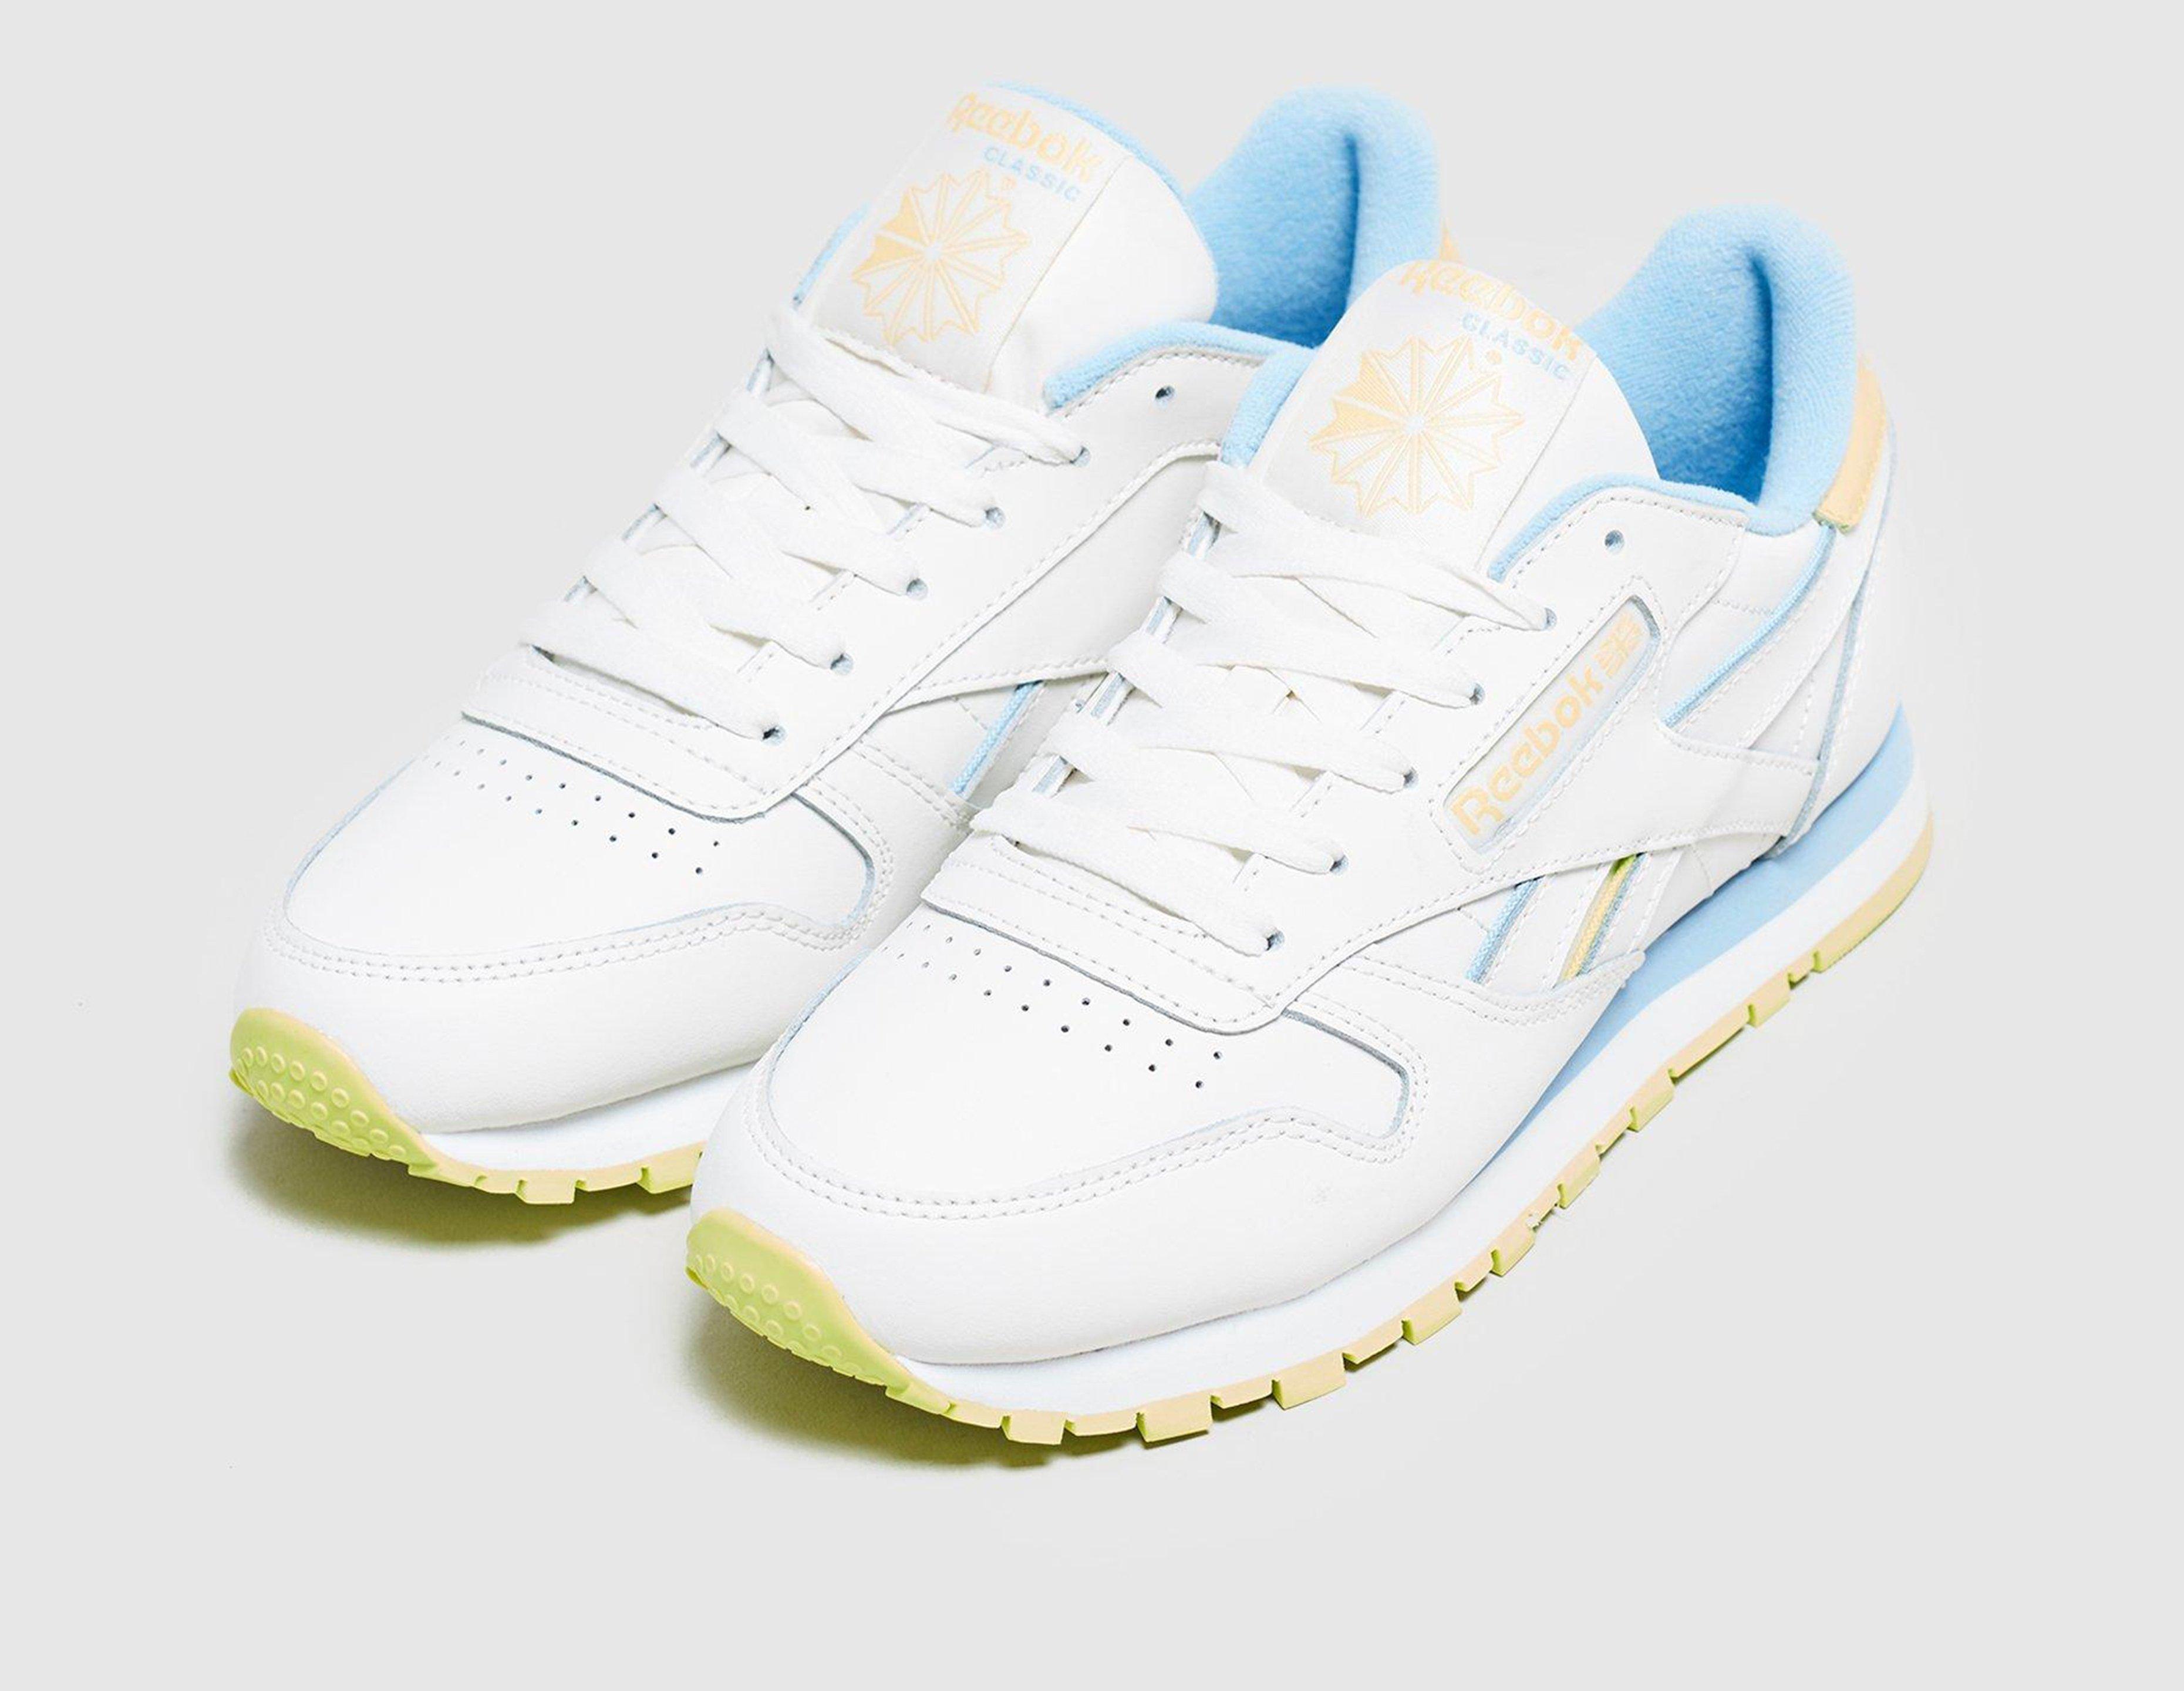 sneakers femme reebok classic leather nt